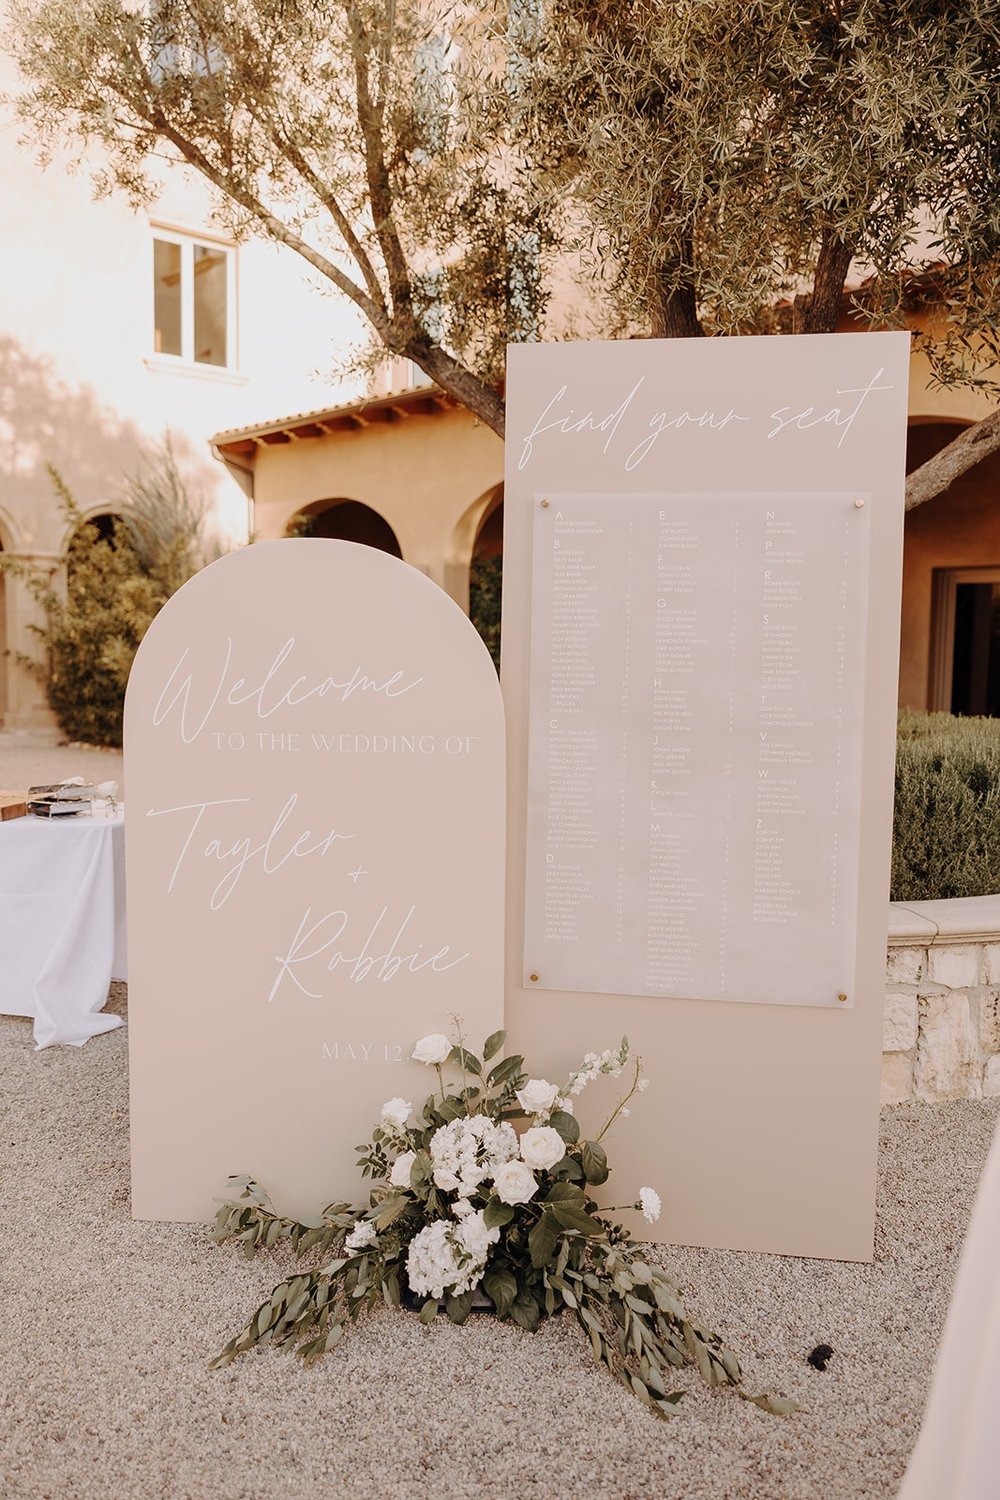 Beige and white wedding sign at Tuscan-themed wedding in California